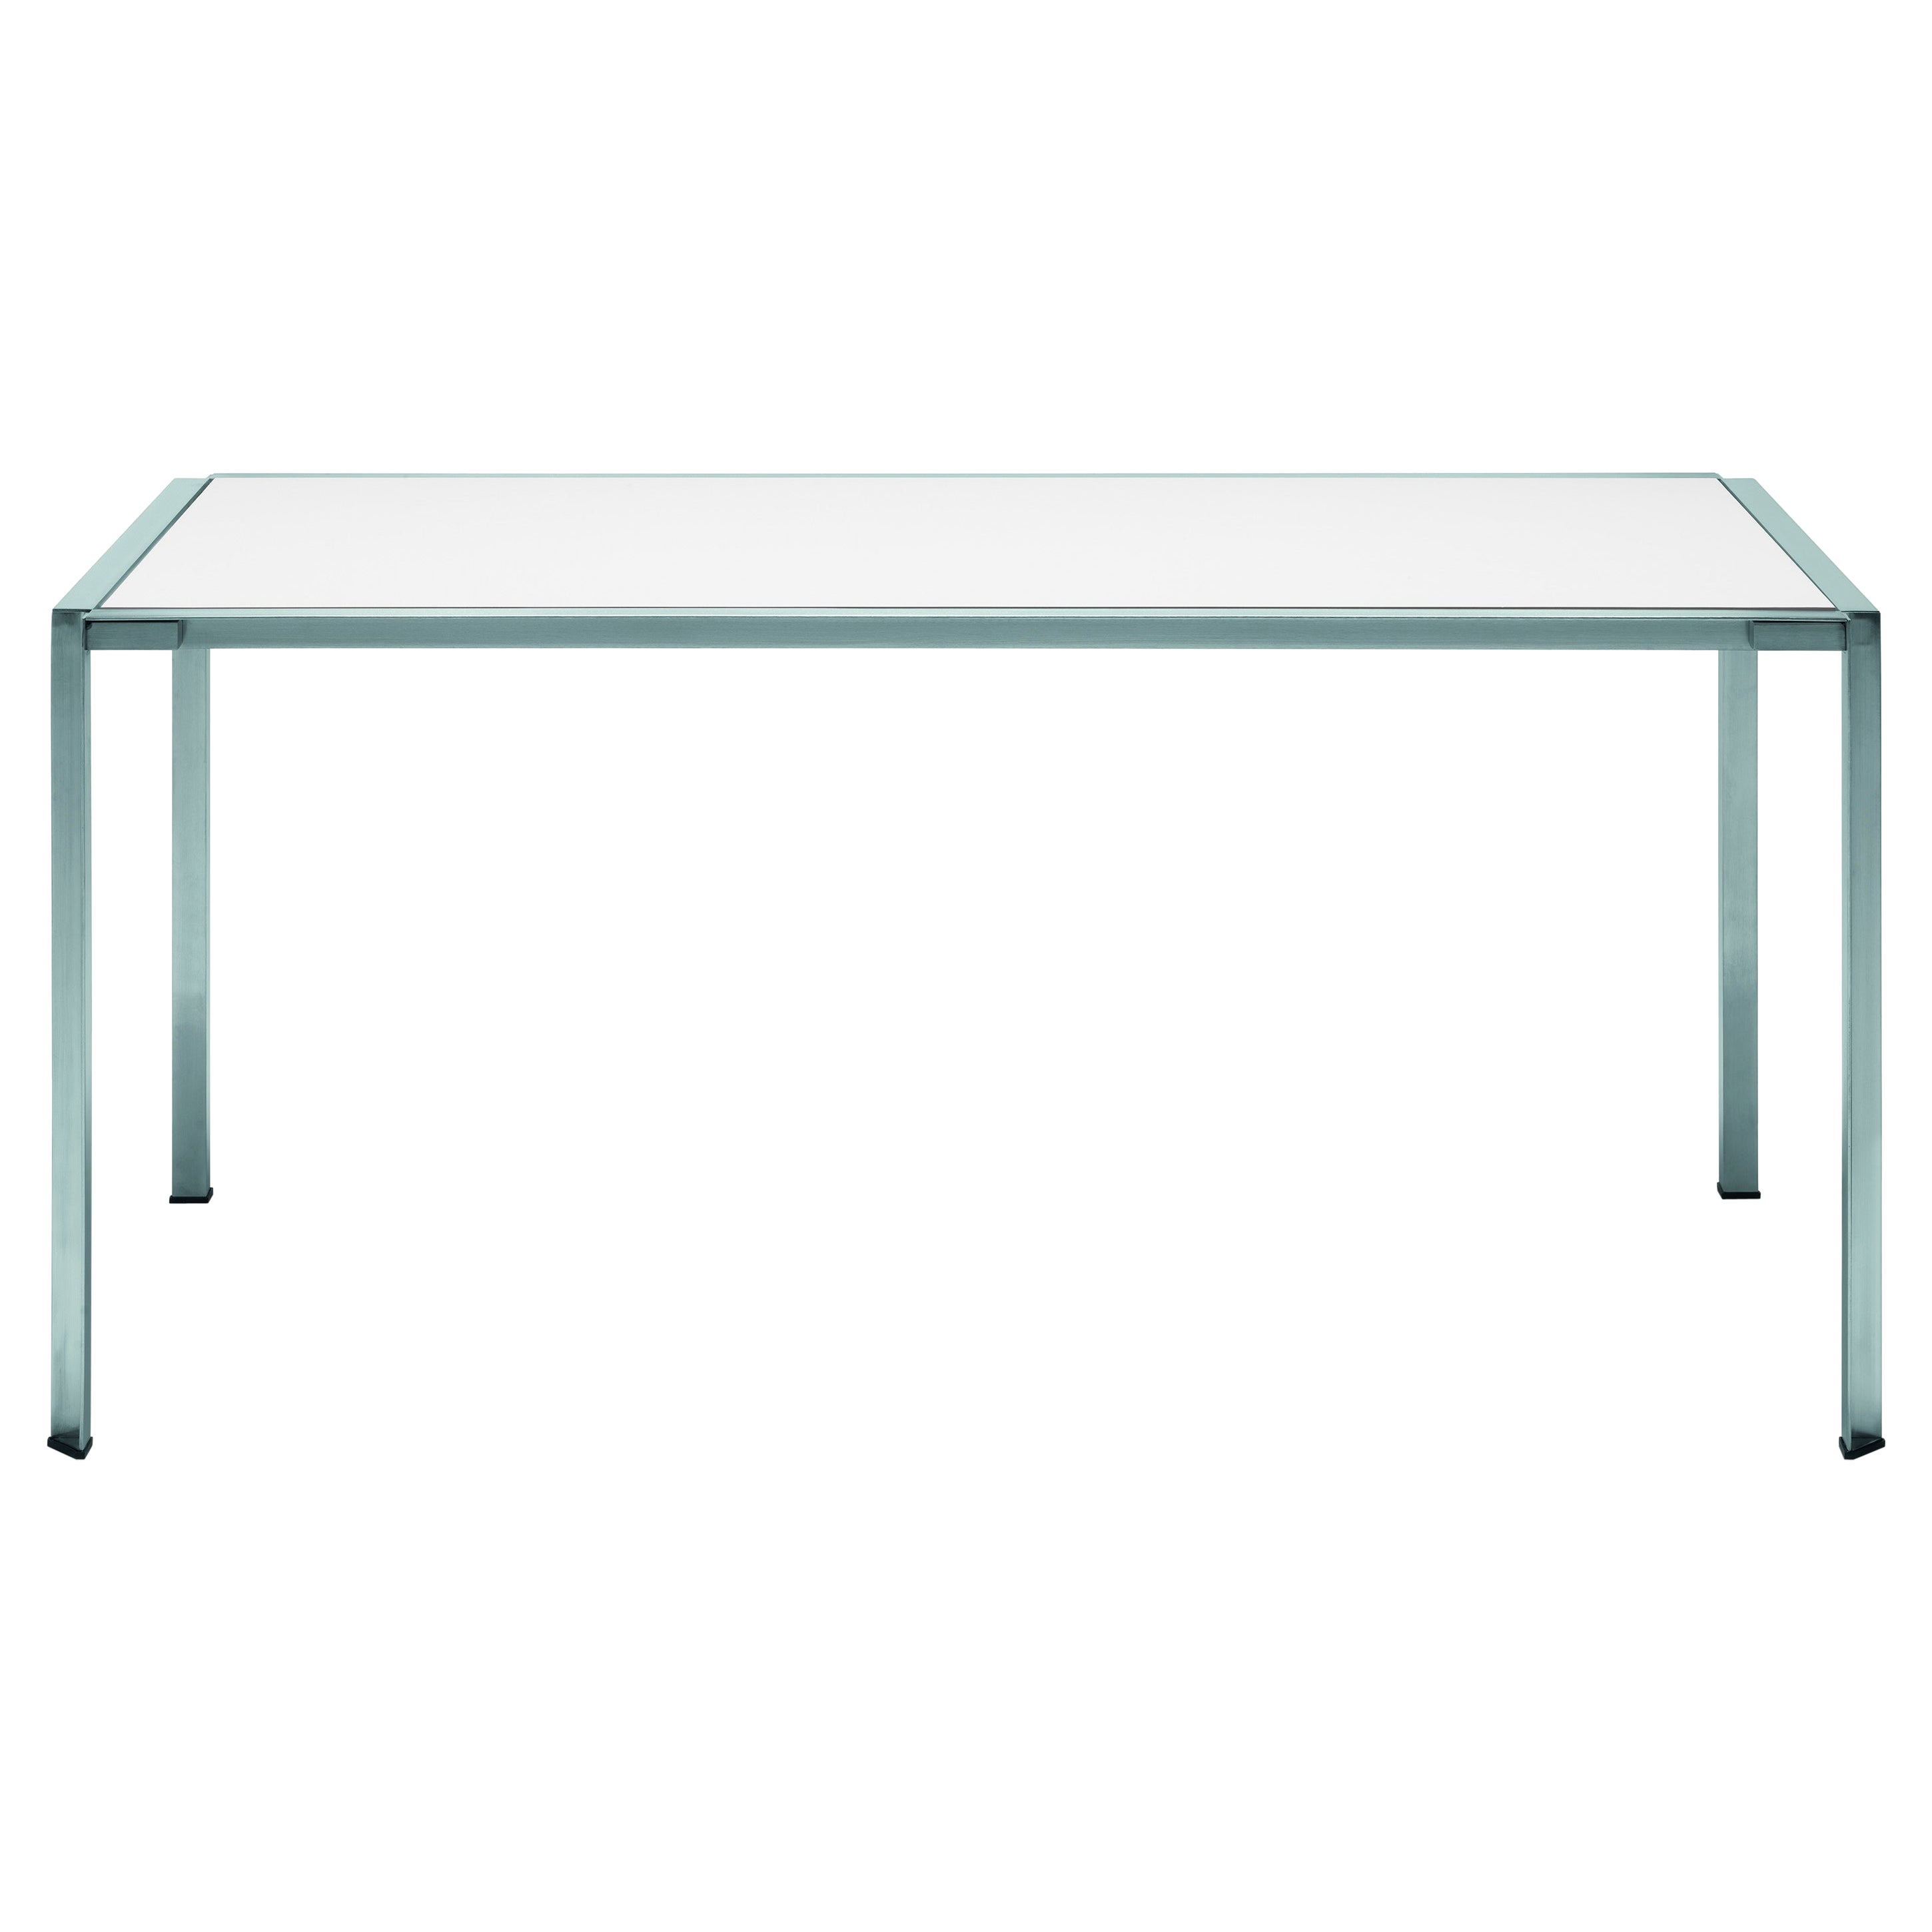 Alias 218_O Green Table with Brushed Stainless Steel Frame and Dekton Top  For Sale